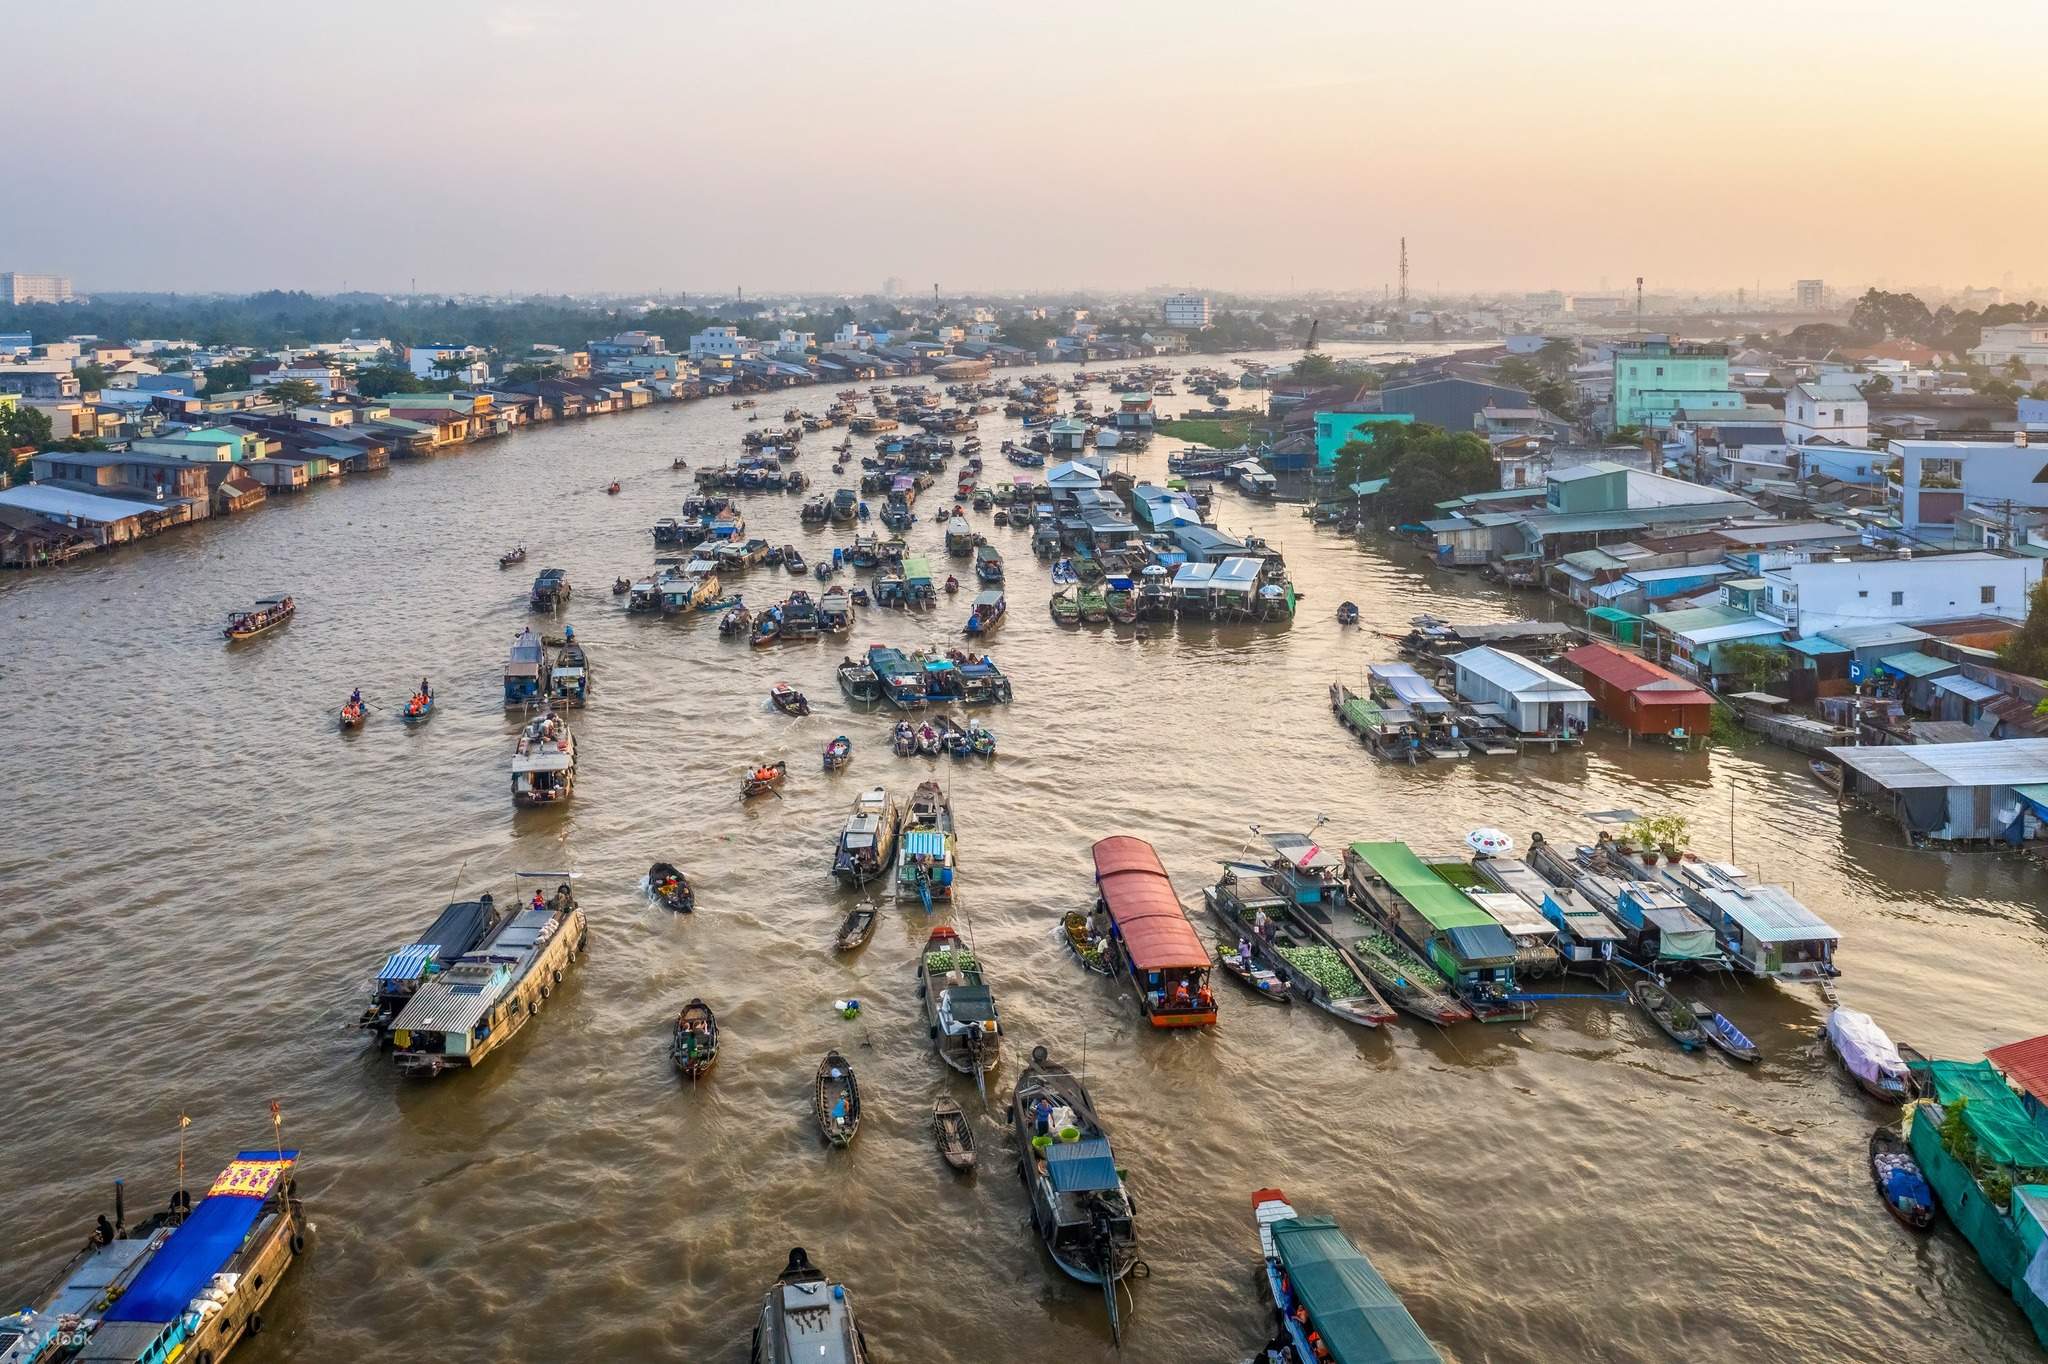 Mekong Delta, Cai Be Floating Market, Tan Phong Island, and Cooking Class Full Day Tour - Klook